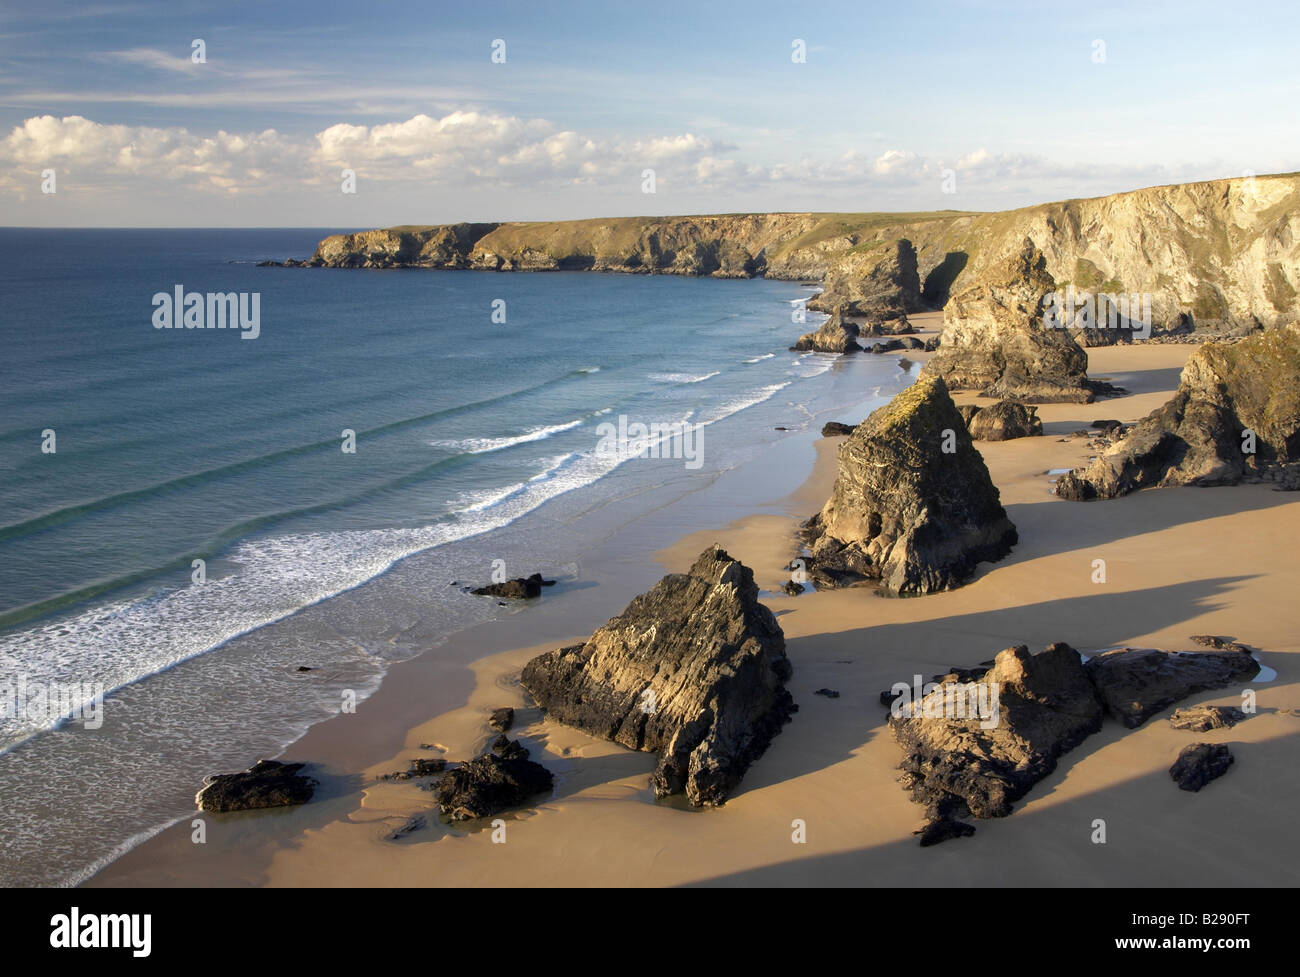 Bedruthan Steps Cornwall UK Date 22 04 2008 Ref ZB764 112612 0012 COMPULSORY CREDIT World Pictures Photoshot Stock Photo